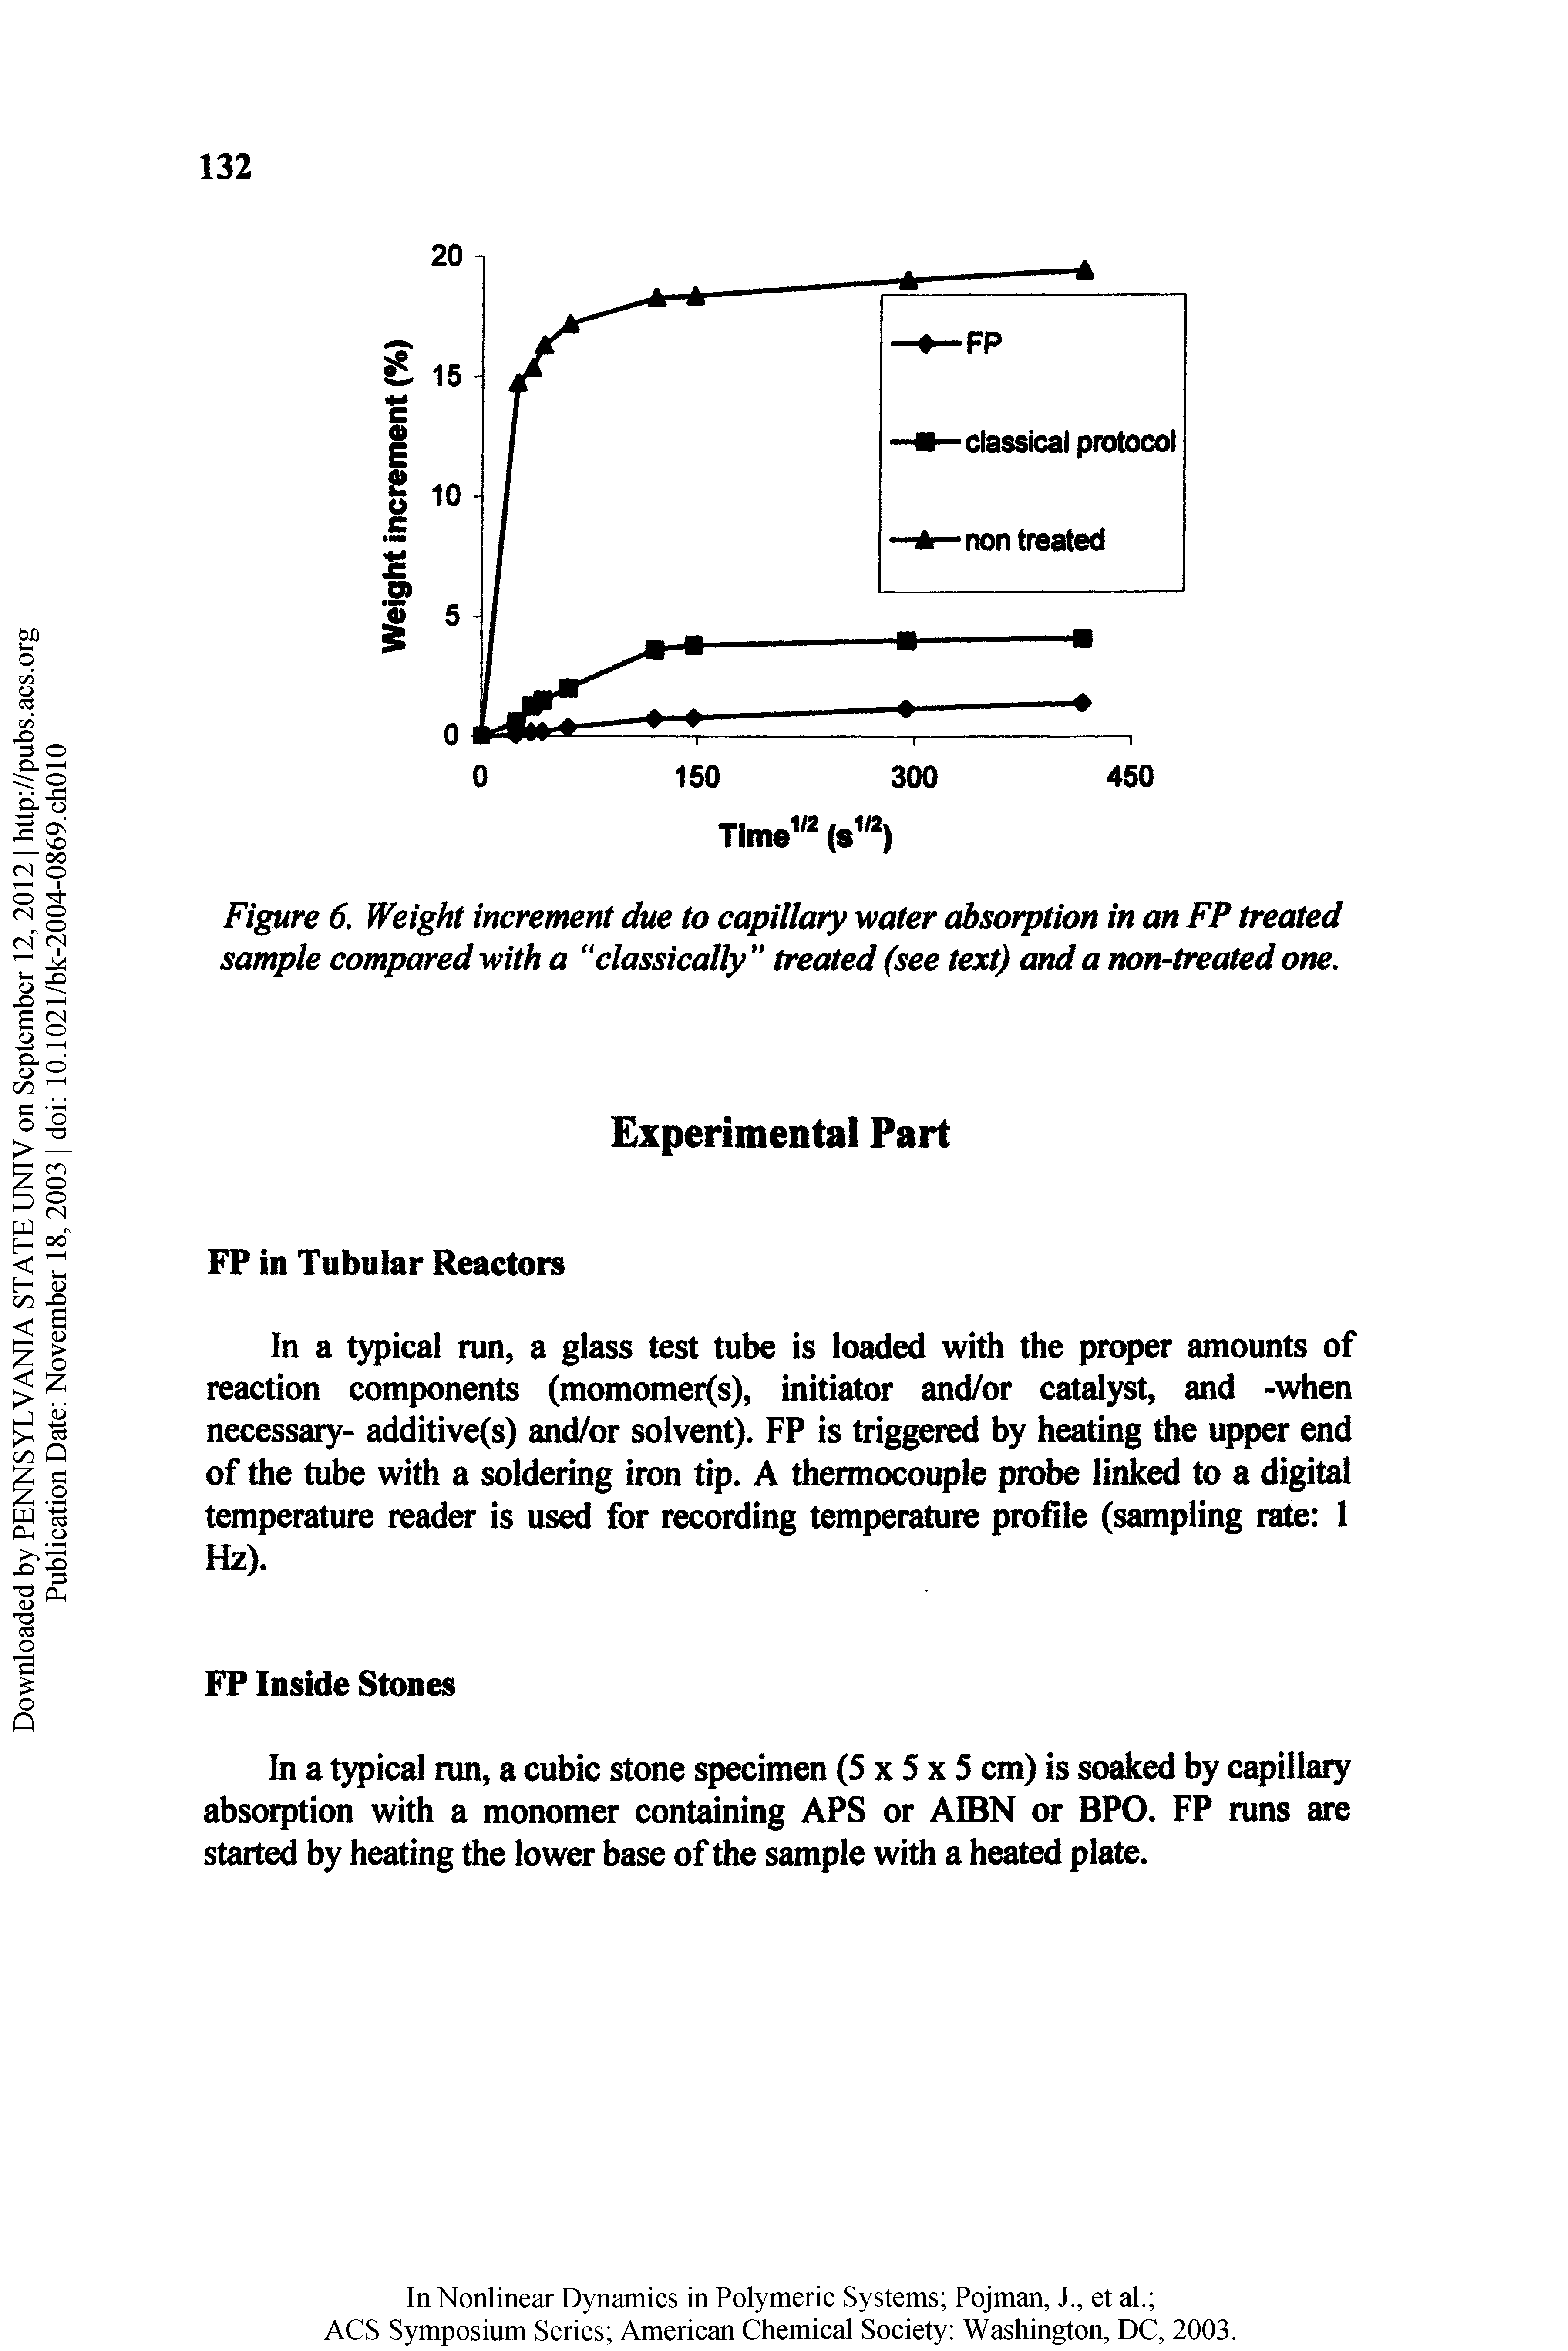 Figure 6. Weight increment due to capillary water cAsorption in an FP treated sample compared with a classically treated (see text) and a rmn-treated one.